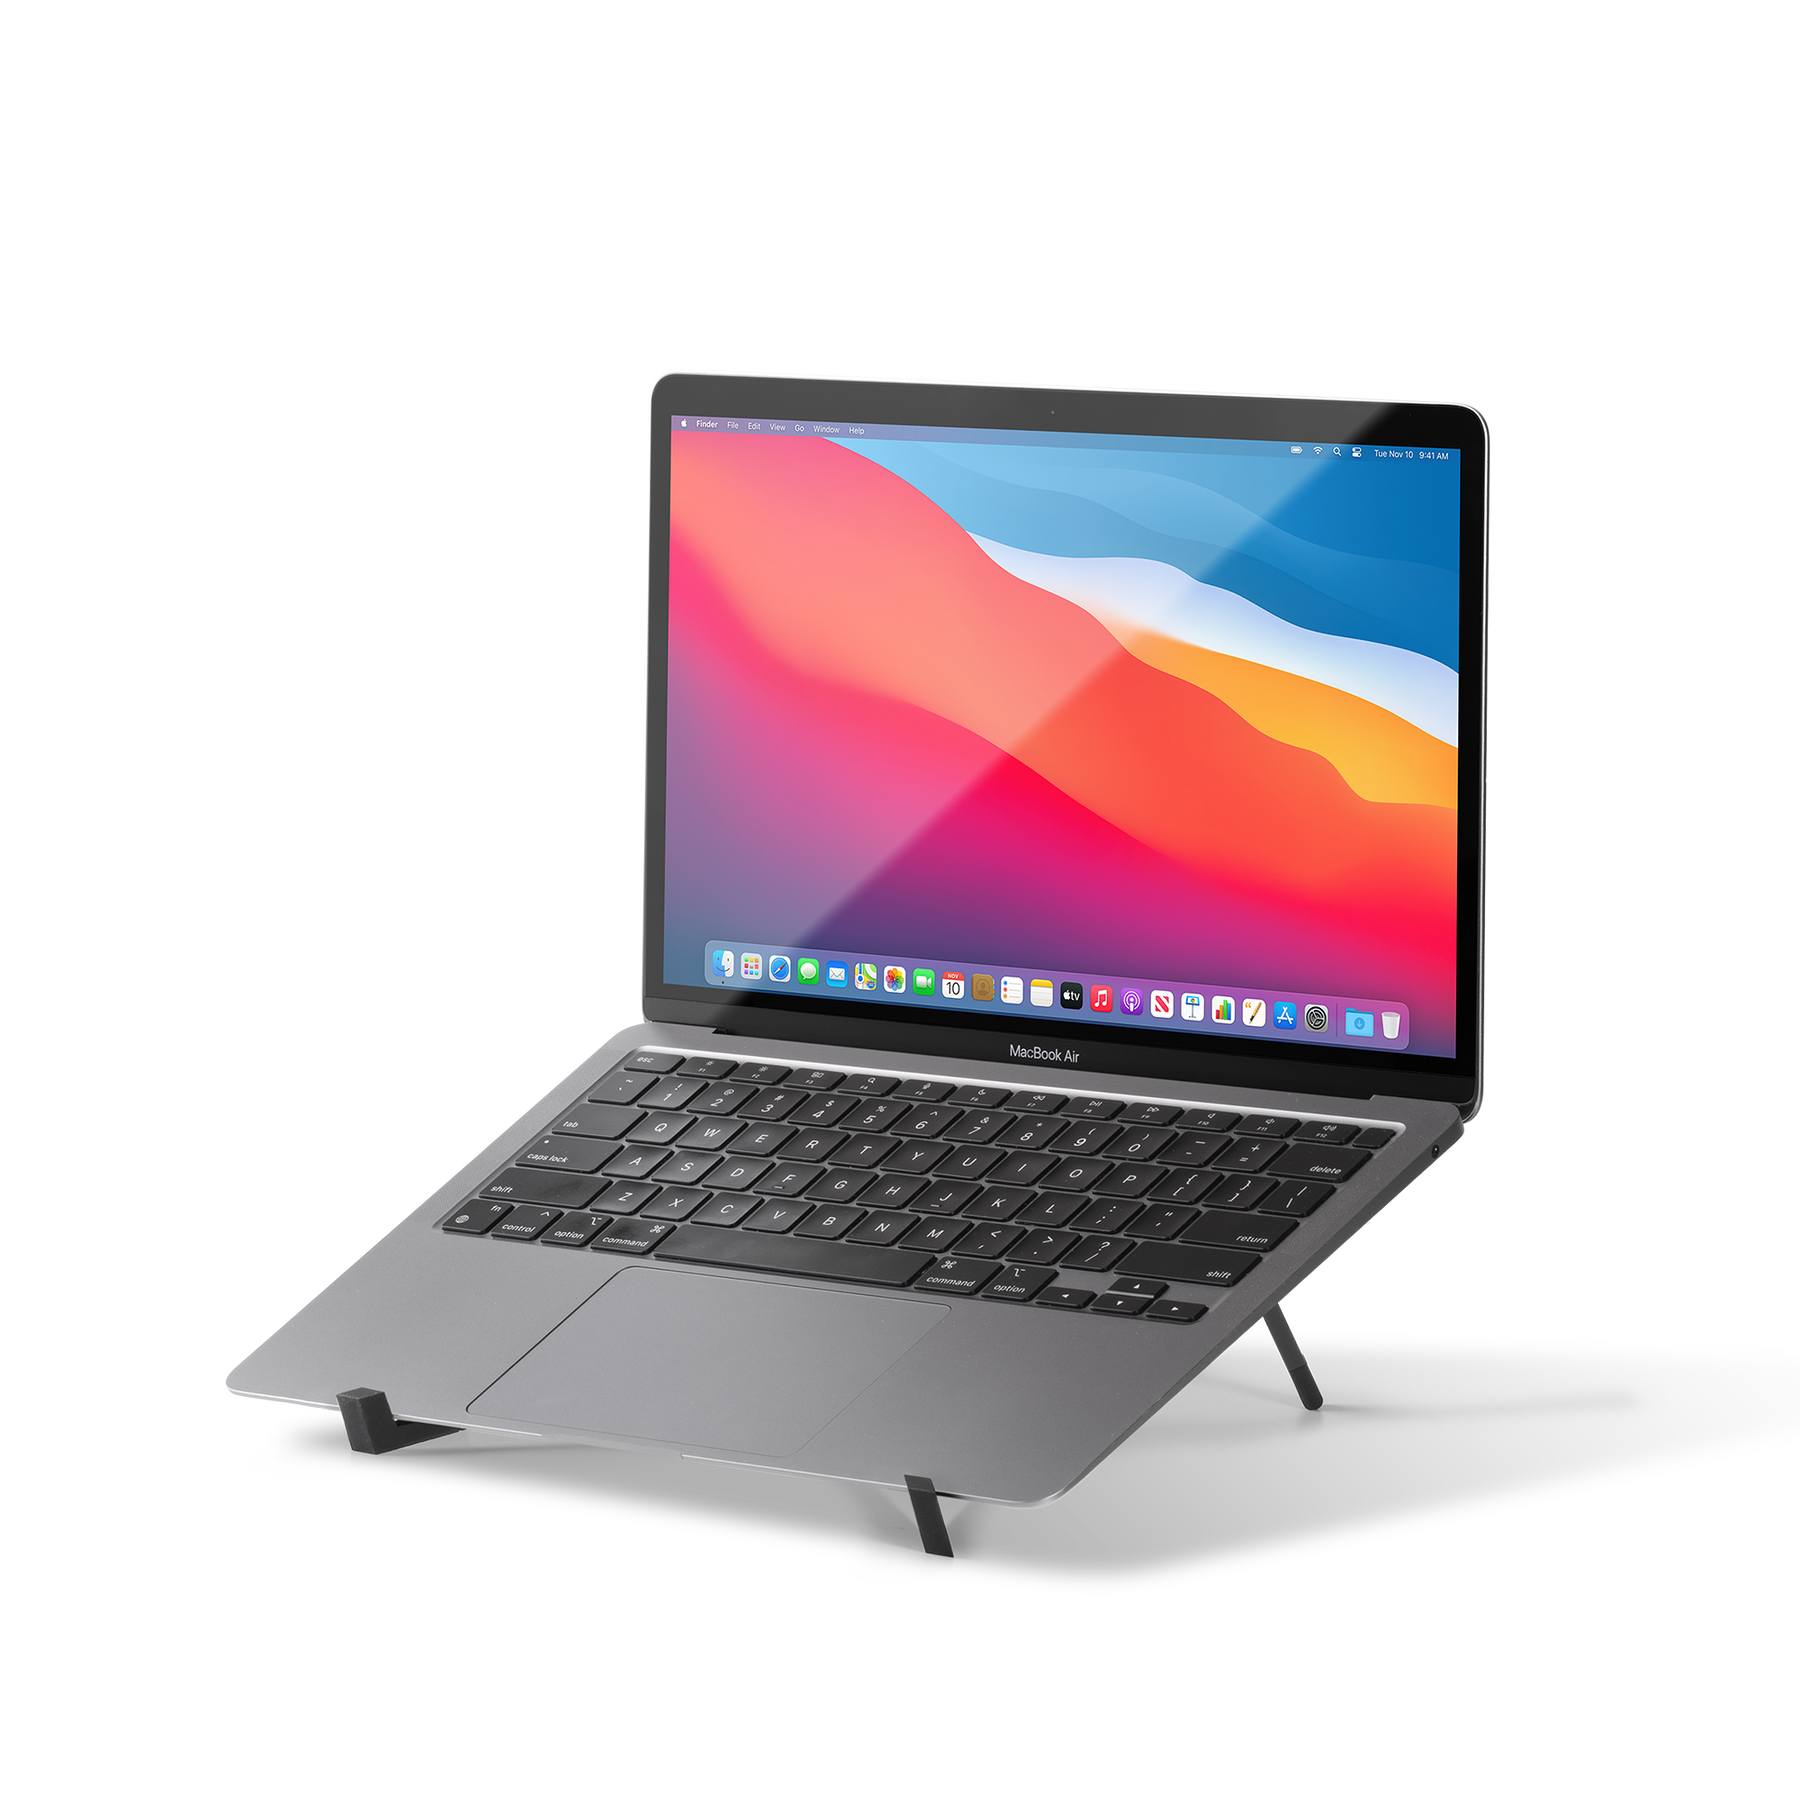 LULULOOK Foldable Adjustable Laptop Stand for Macbook, HP, Laptops  (10-16inch) - Lululook Official